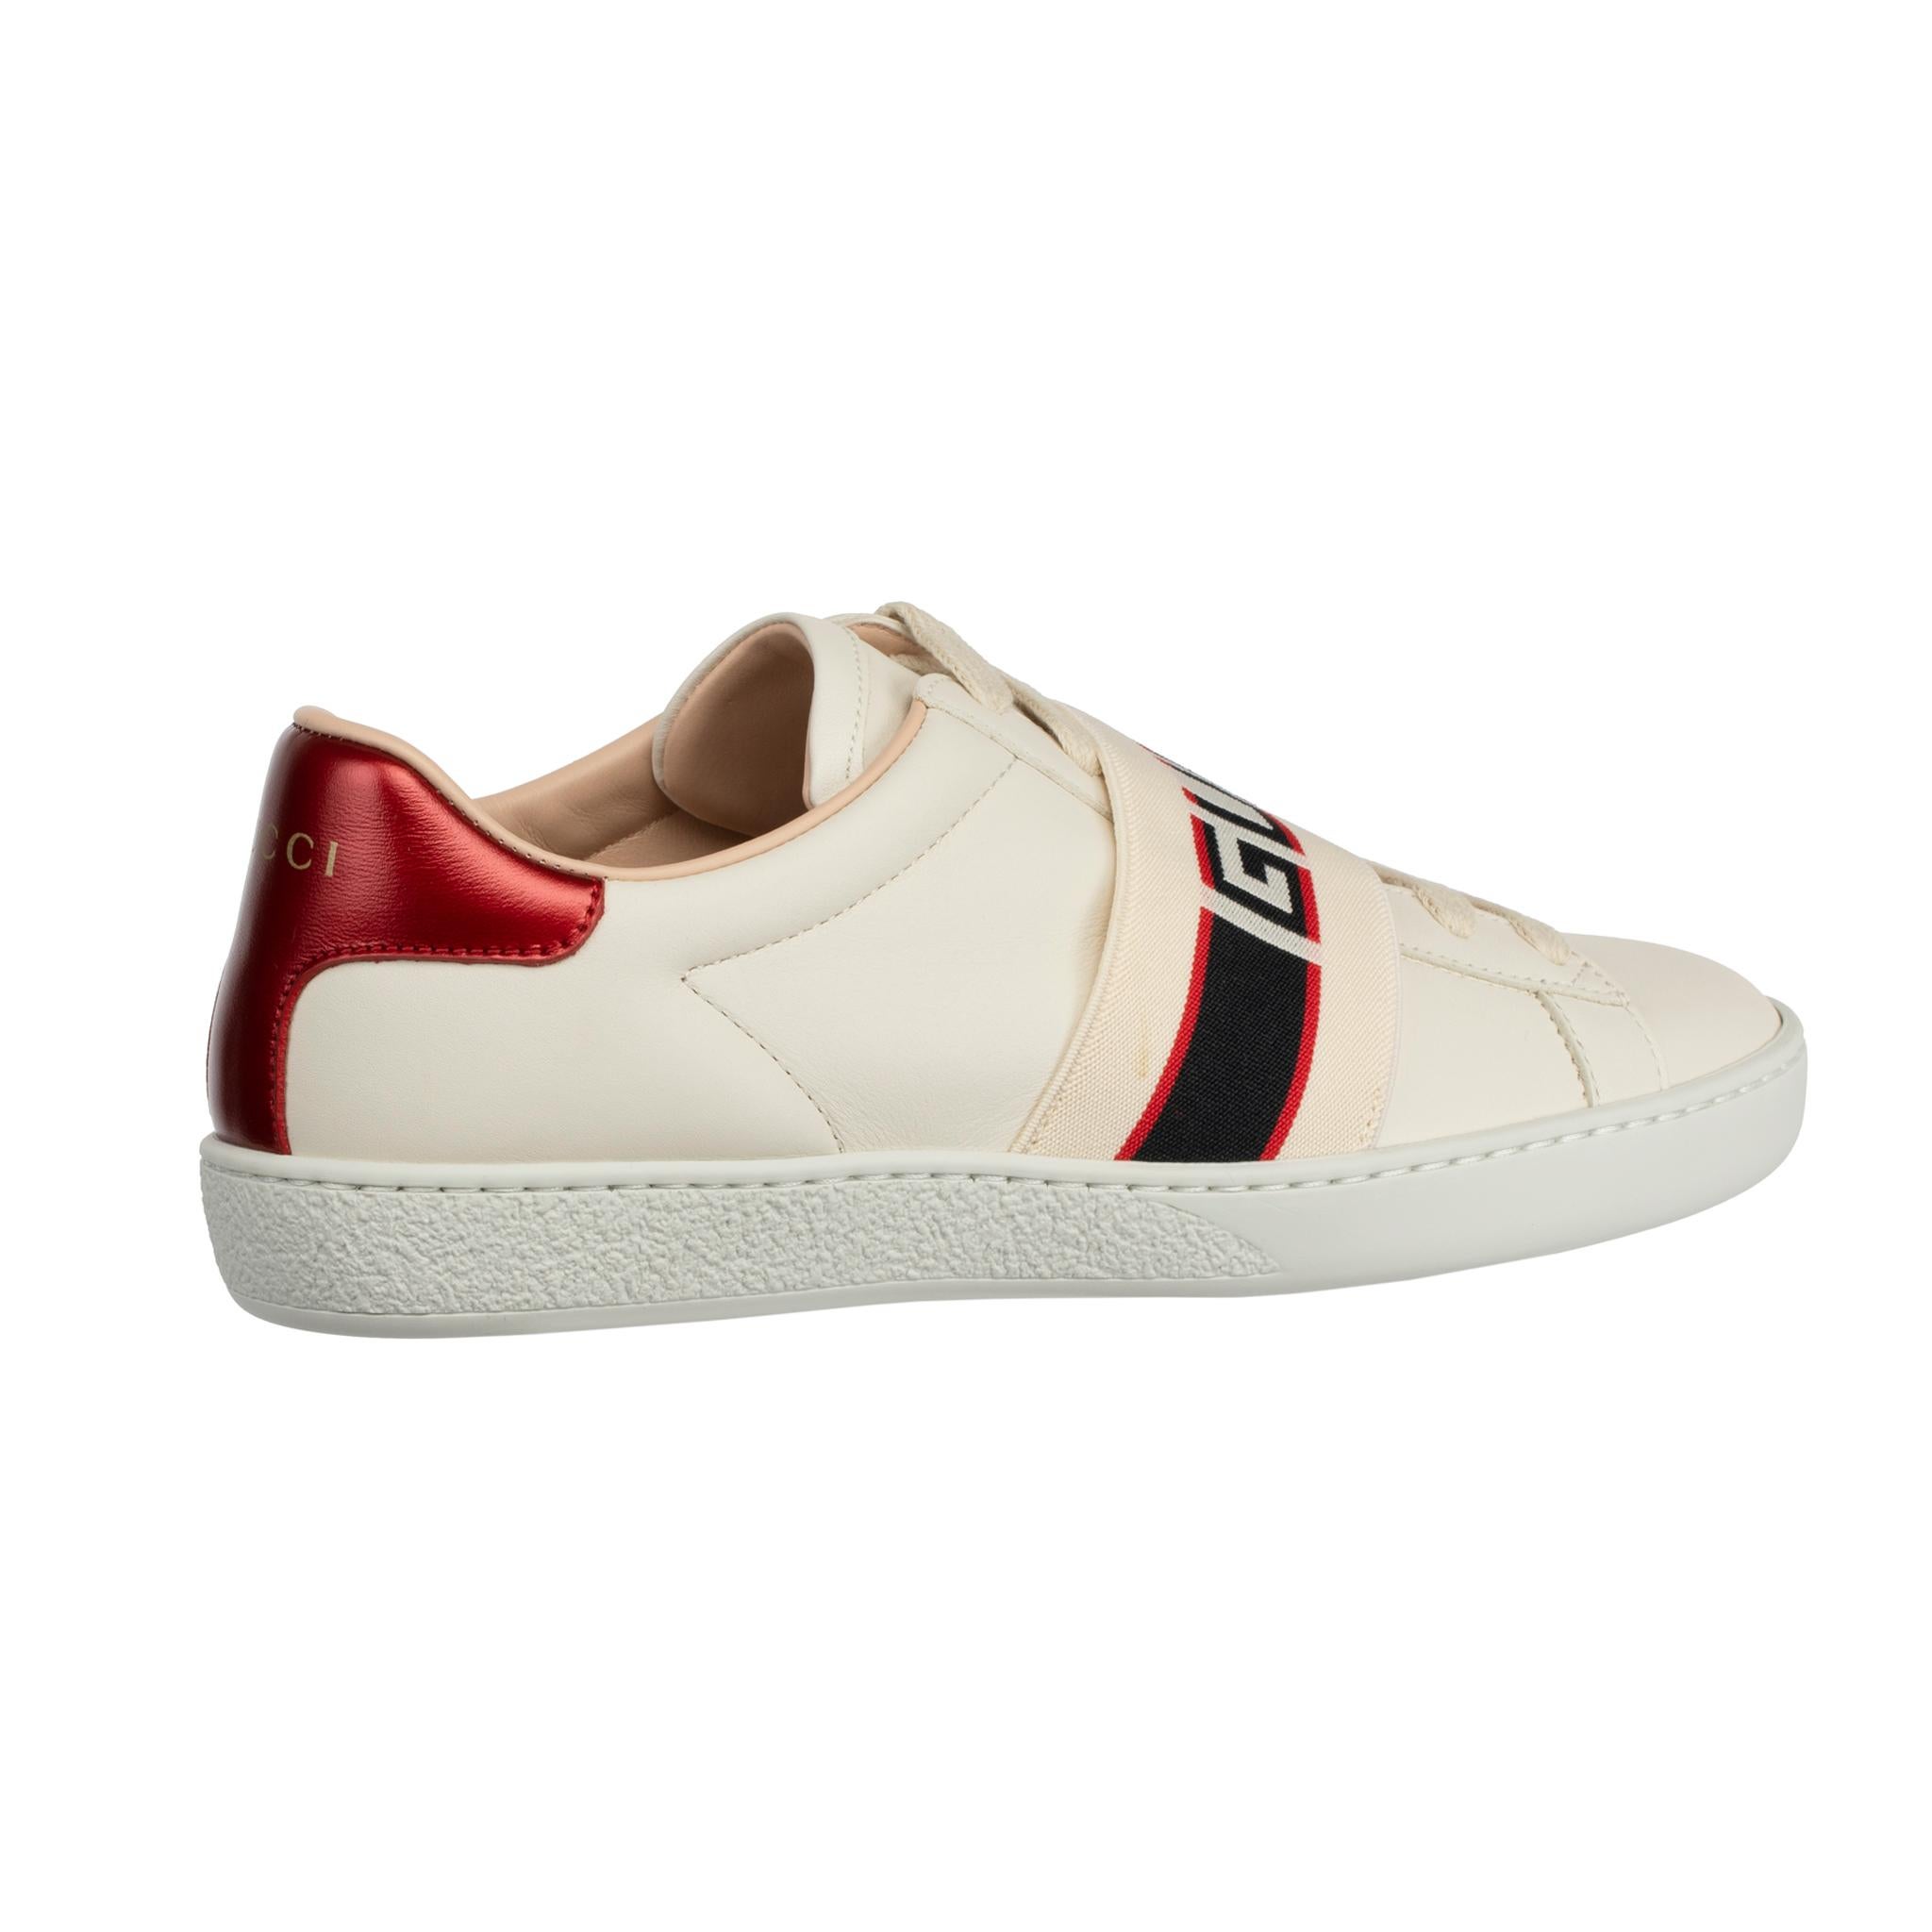 Beige Gucci Ace Sneaker Off-White & Metallic Red 35.5 IT For Sale